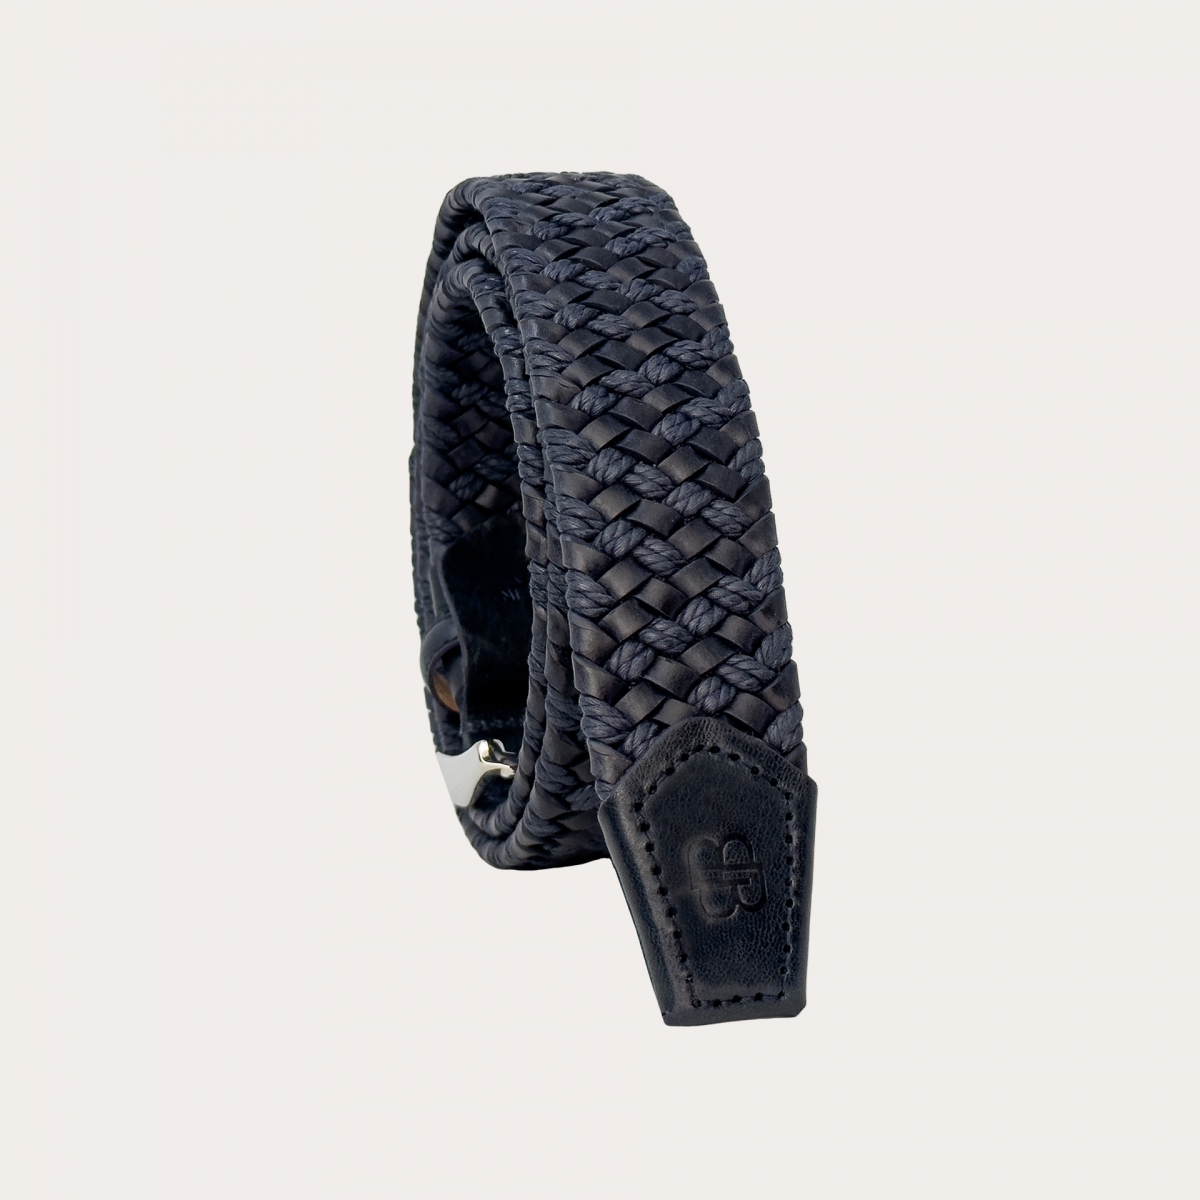 Blue elastic braided belt in leather and cotton